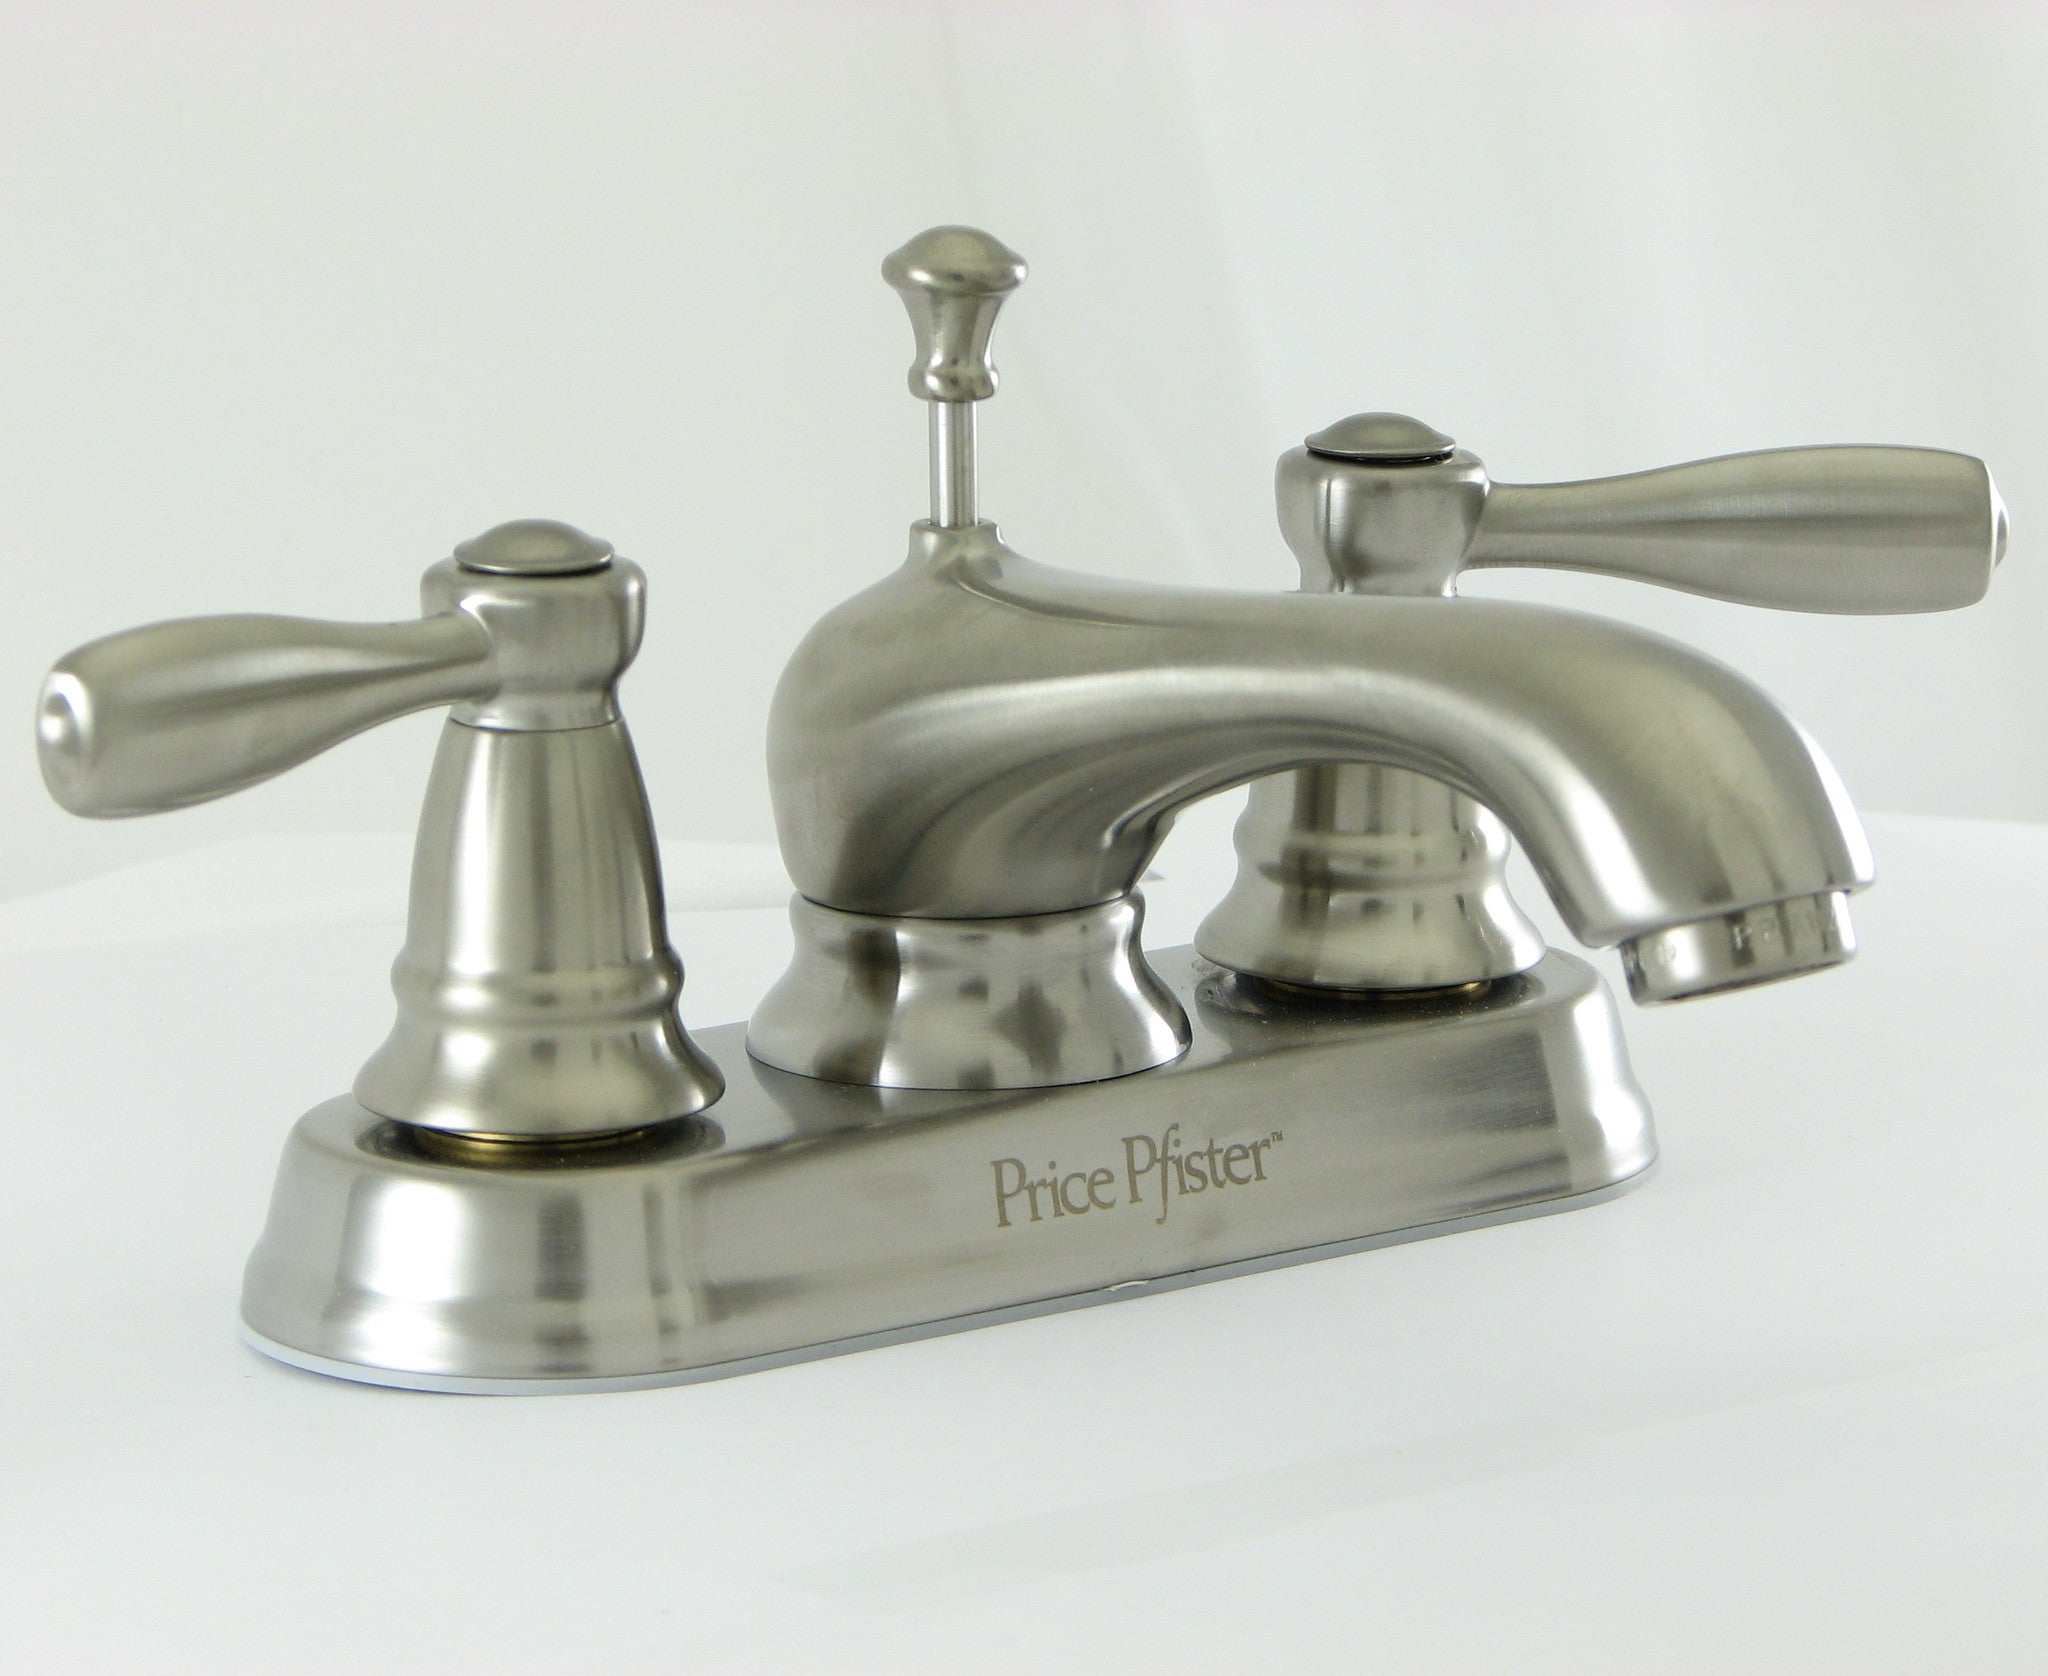 Price Pfister Bath Faucet Your Home Supply